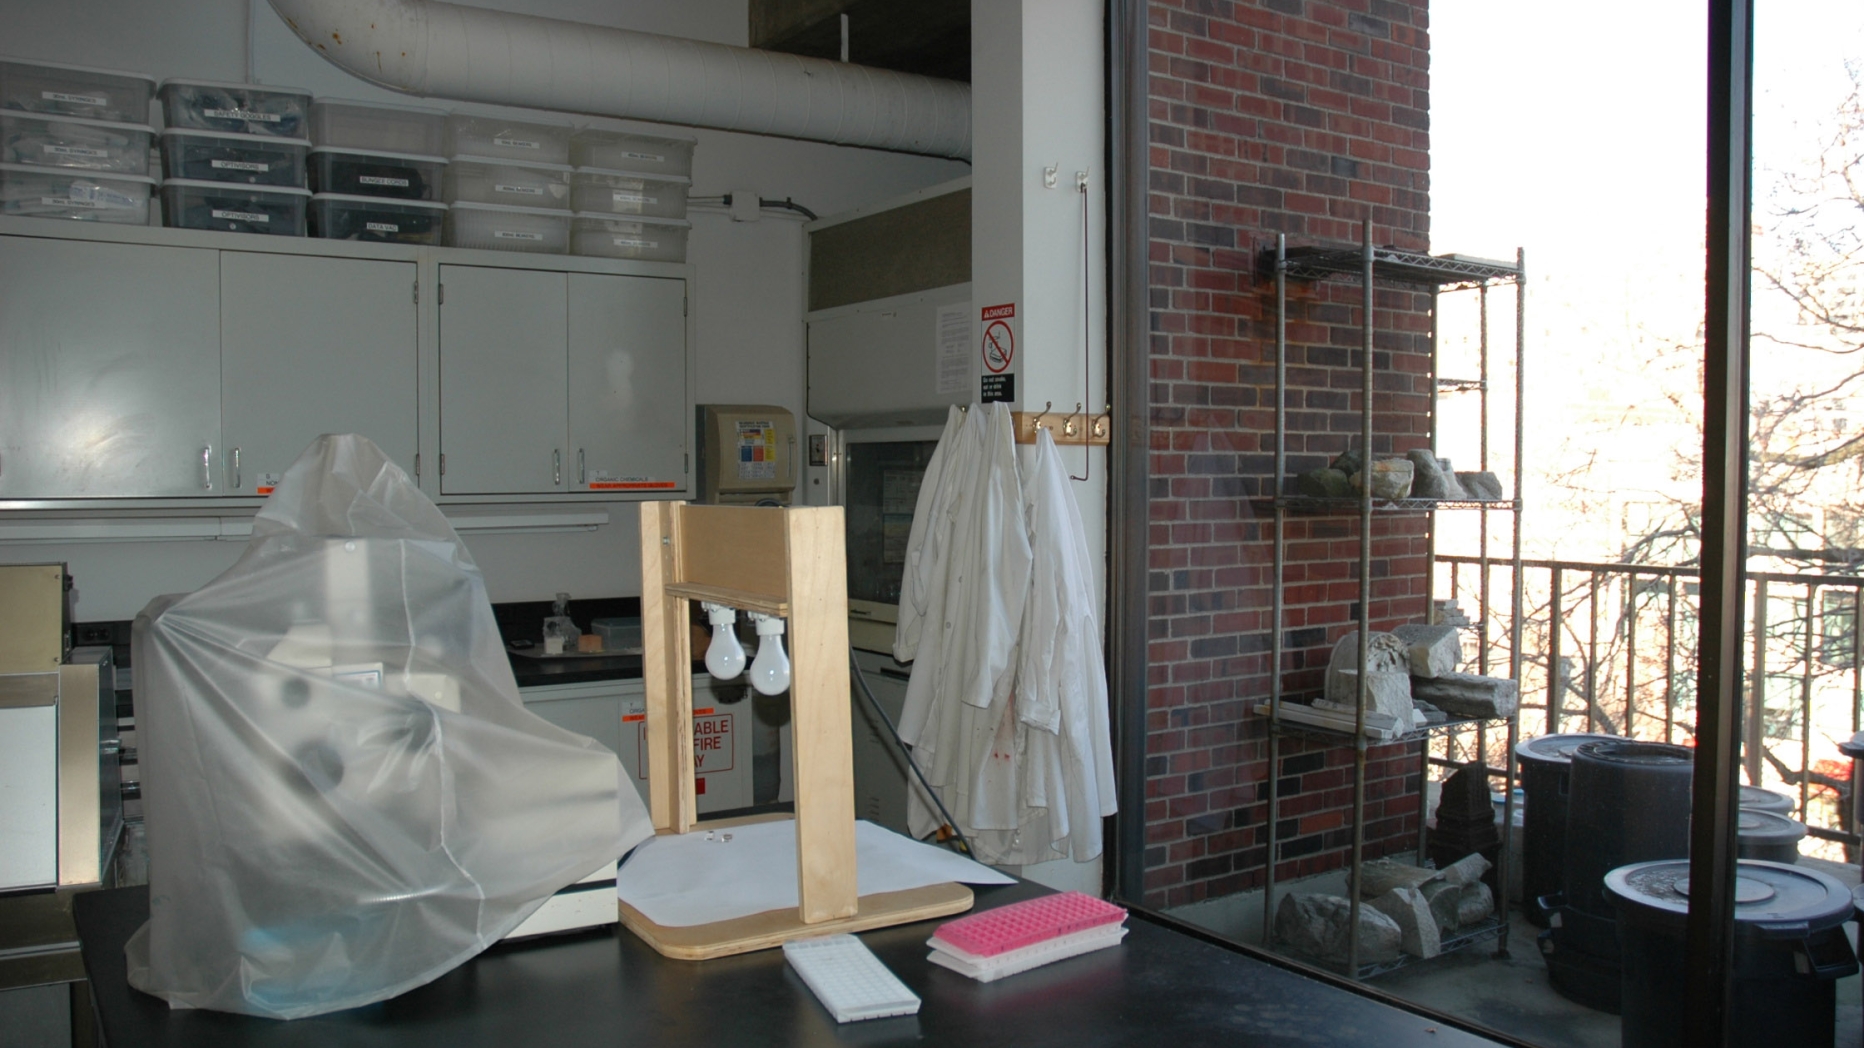 Architectural Conservation Laboratory